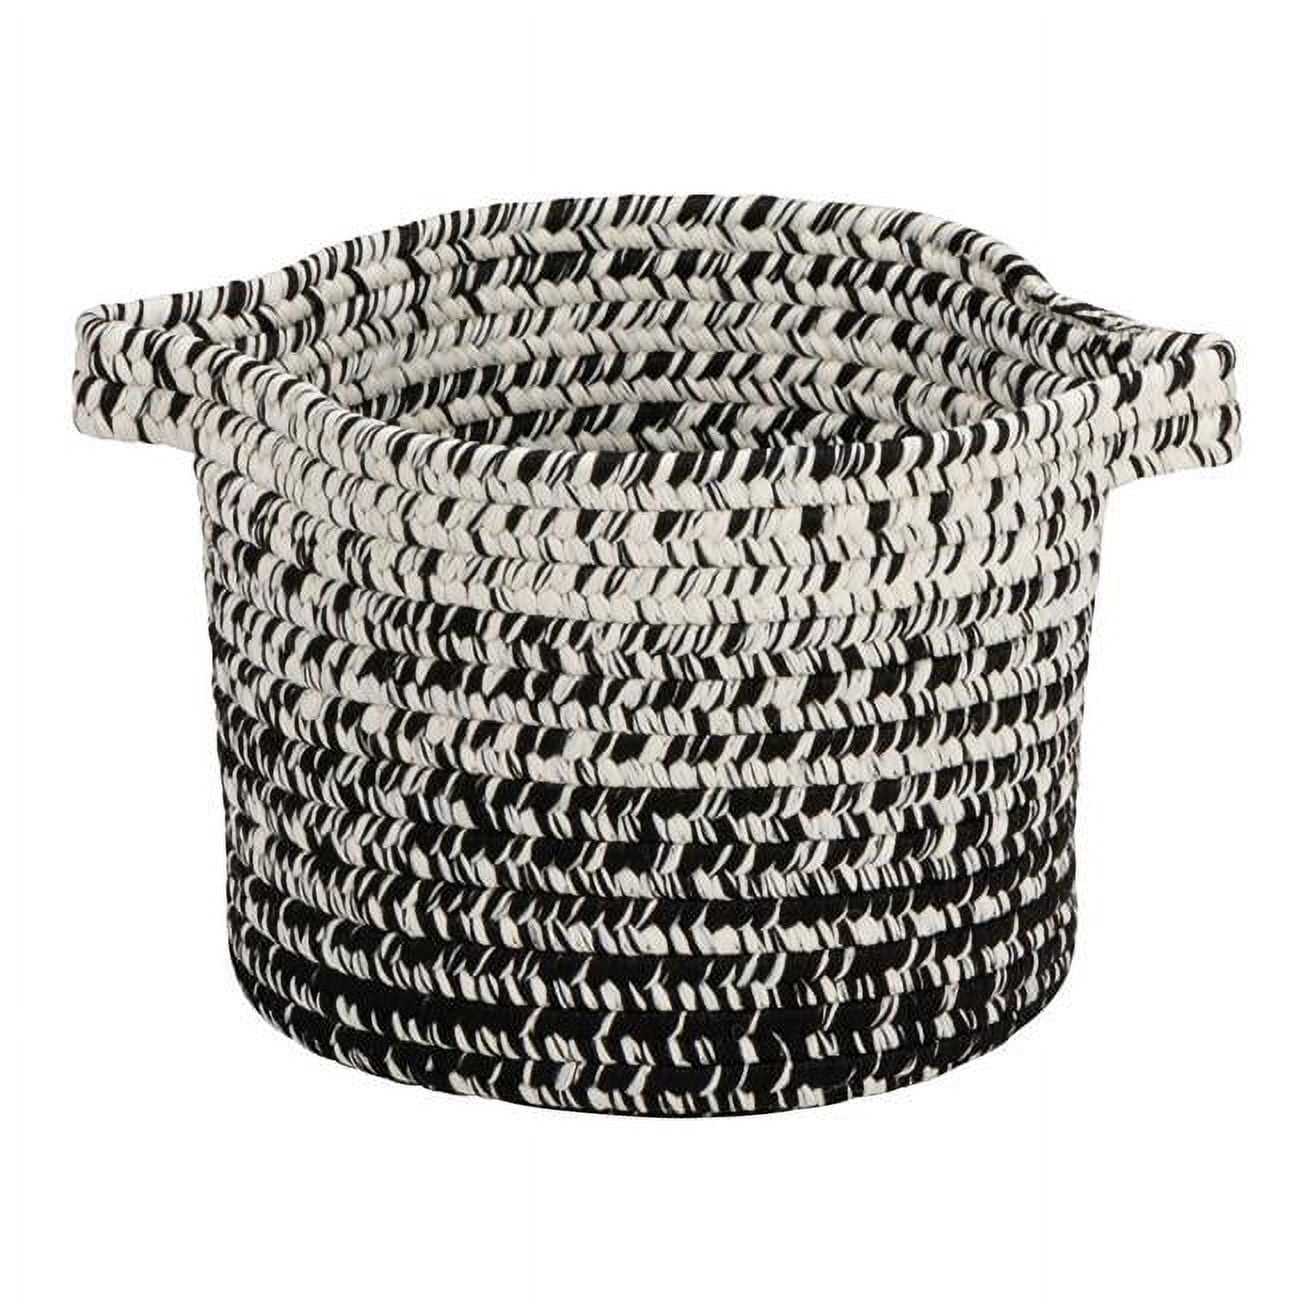 Colonia Mills Mo69 Monet Ombre Basket, Black & White - 16 X 16 X 20 In.